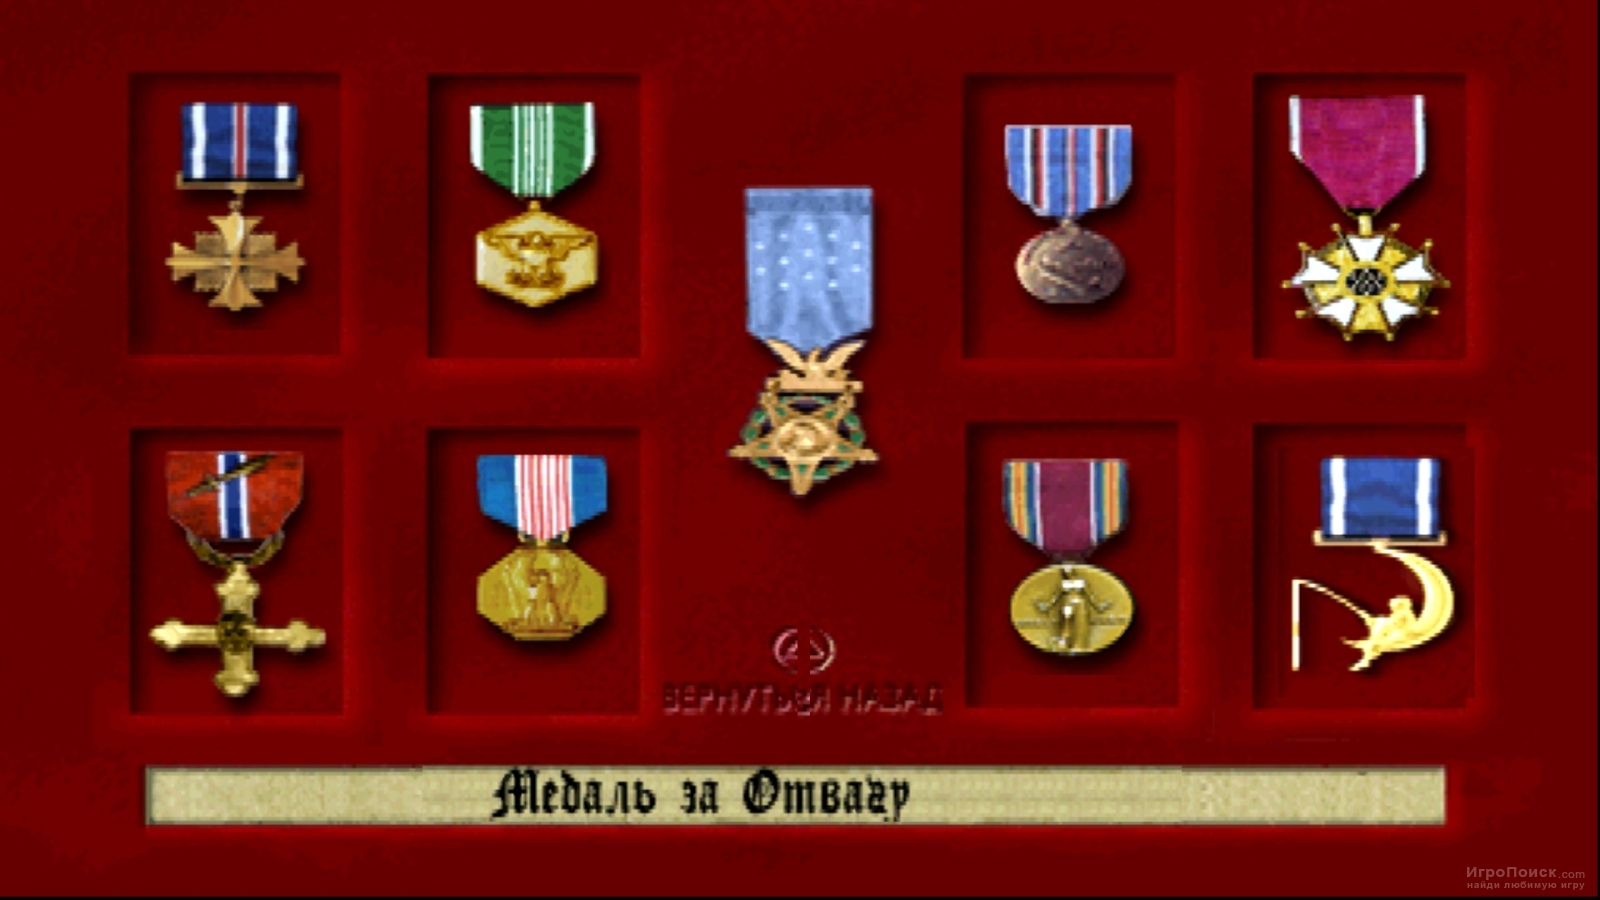    Medal of Honor